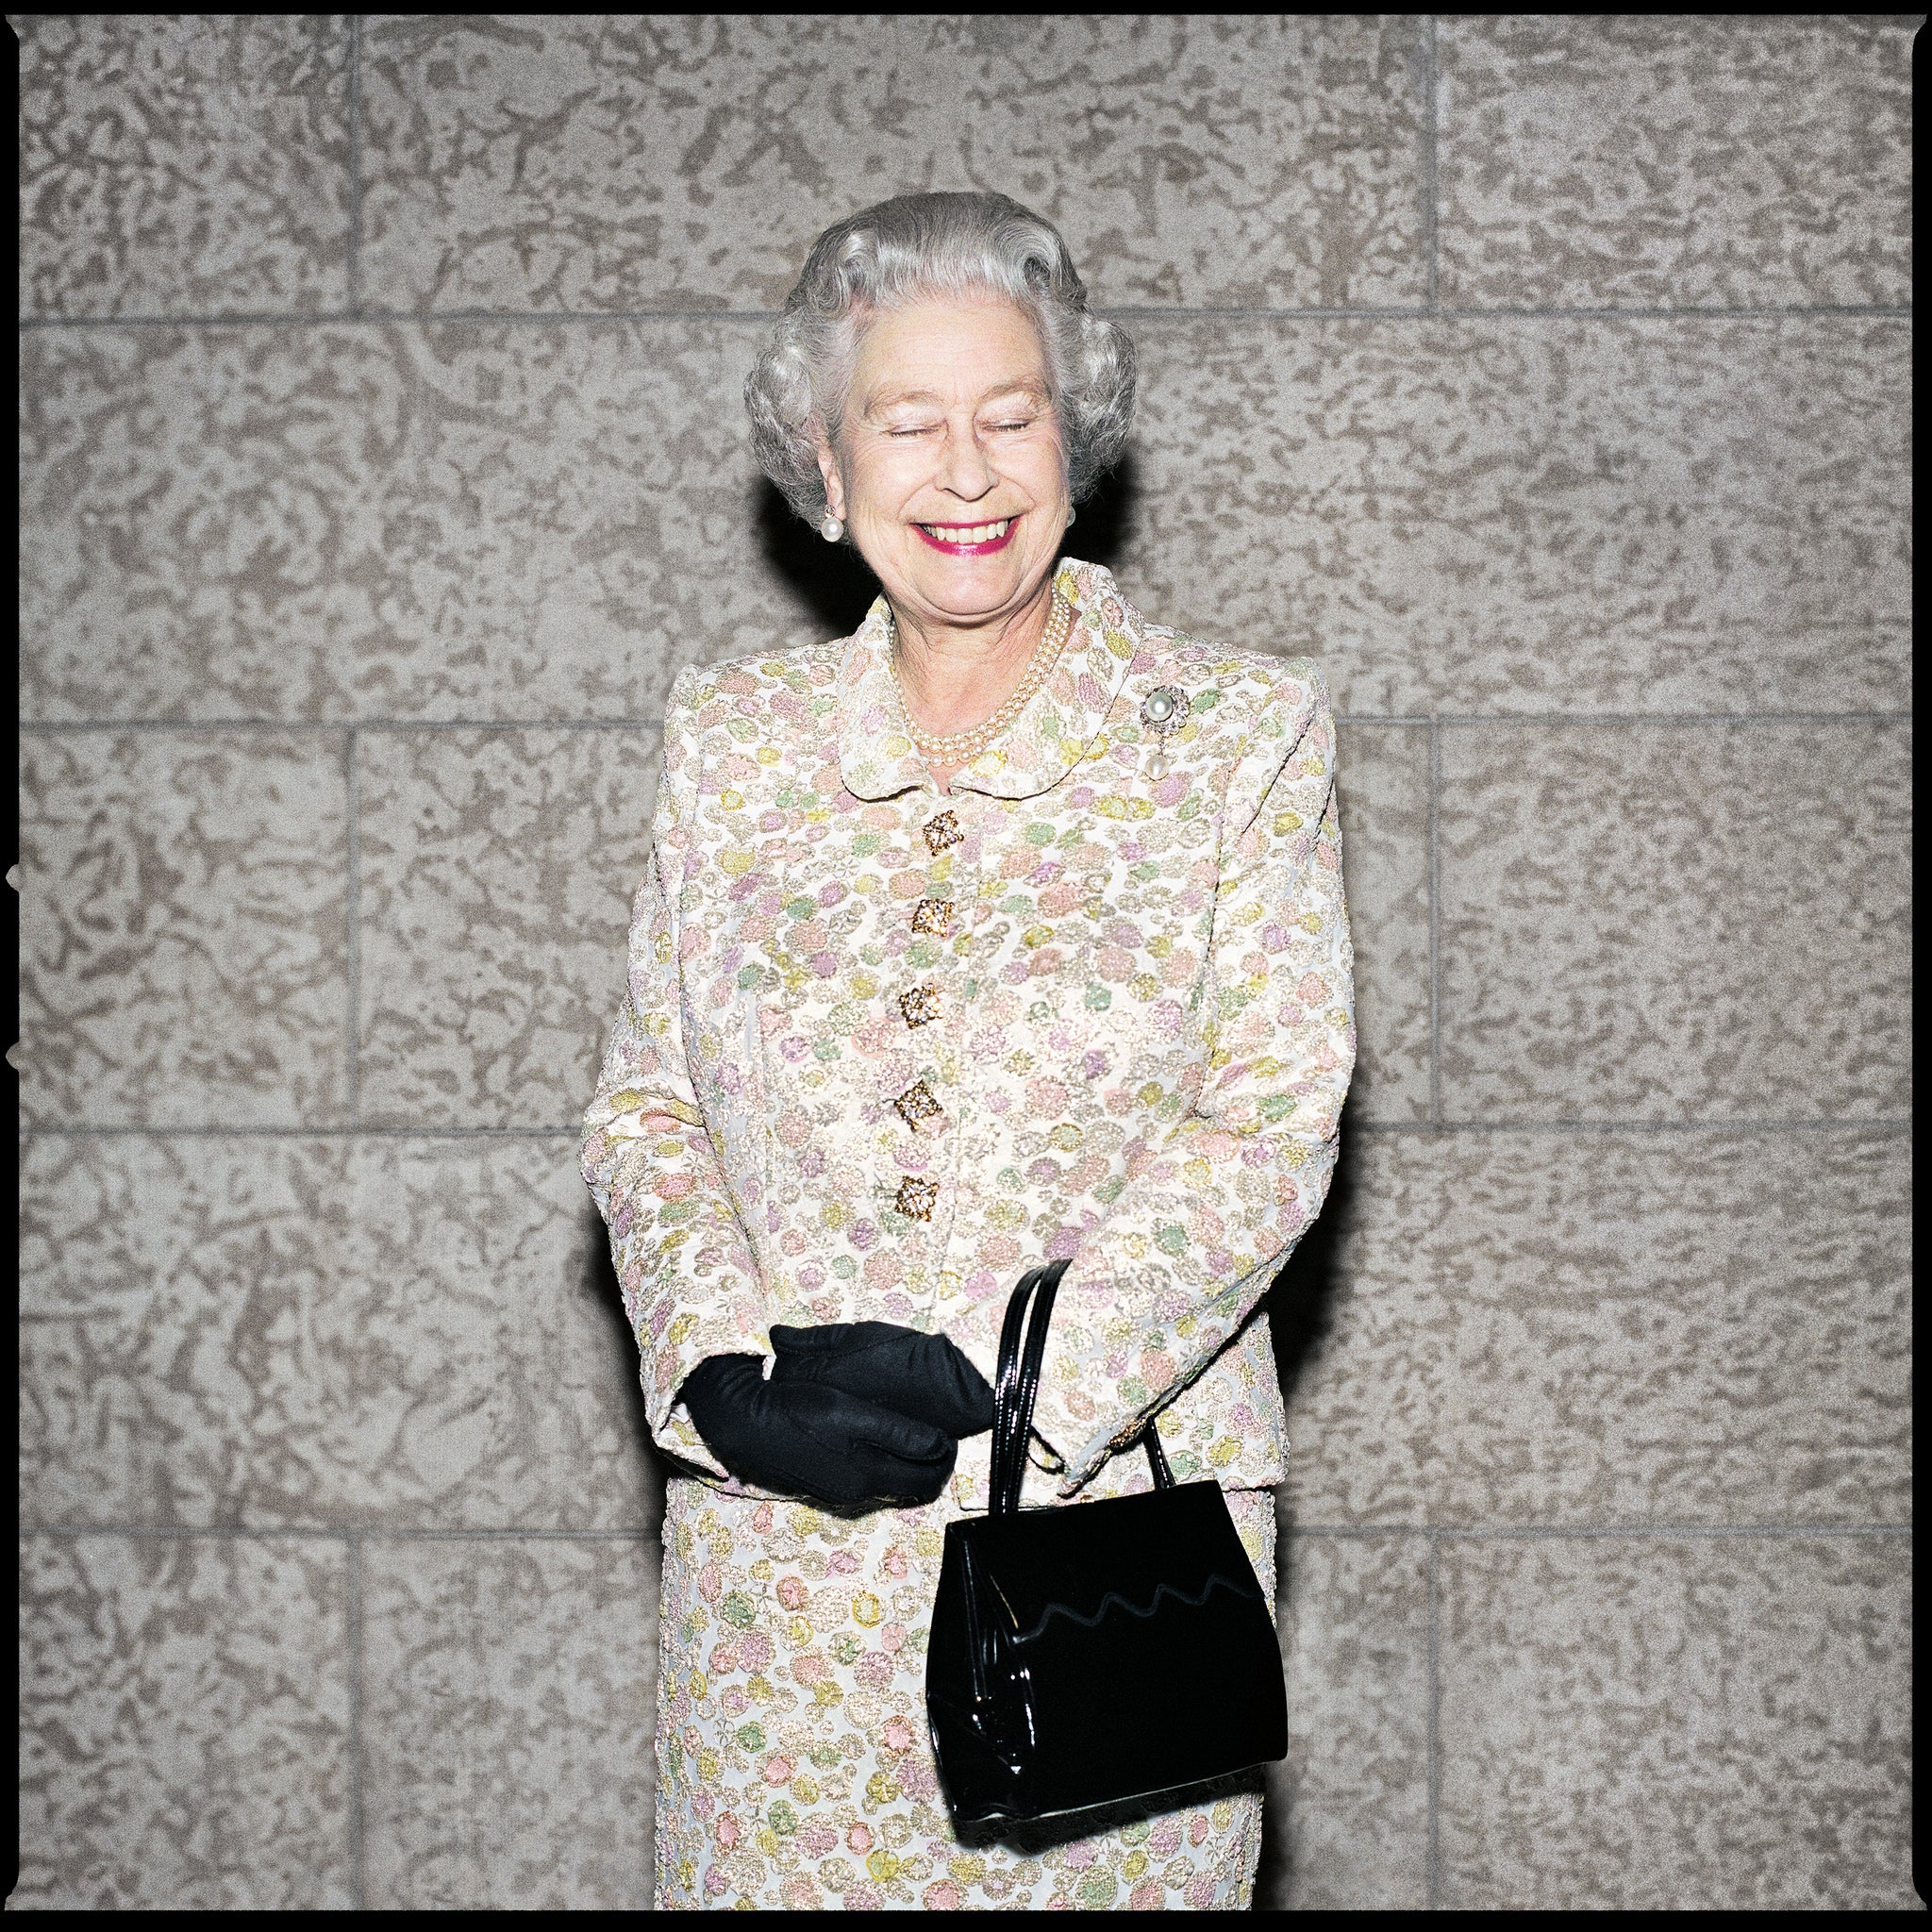 Queen Elizabeth II standing in front of a Tyndall stone wall.